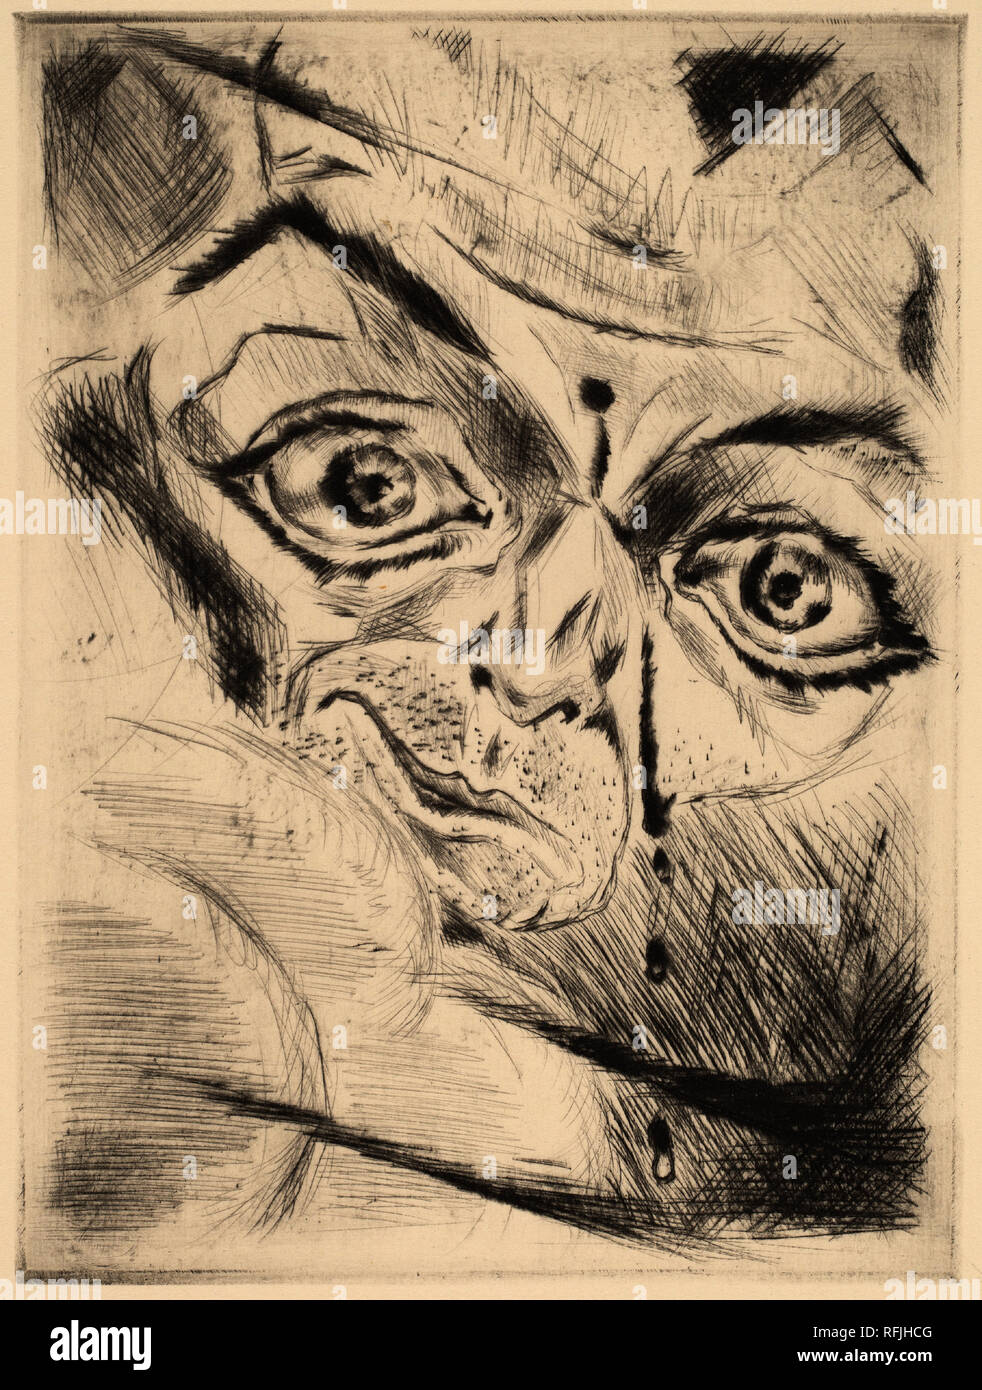 Peter with a Gunshot Wound in His Forehead. Dated: 1918. Dimensions: sheet: 38.7 × 28.2 cm (15 1/4 × 11 1/8 in.)  plate: 17.2 × 12.7 cm (6 3/4 × 5 in.). Medium: drypoint. Museum: National Gallery of Art, Washington DC. Author: Walter Gramatté. Stock Photo